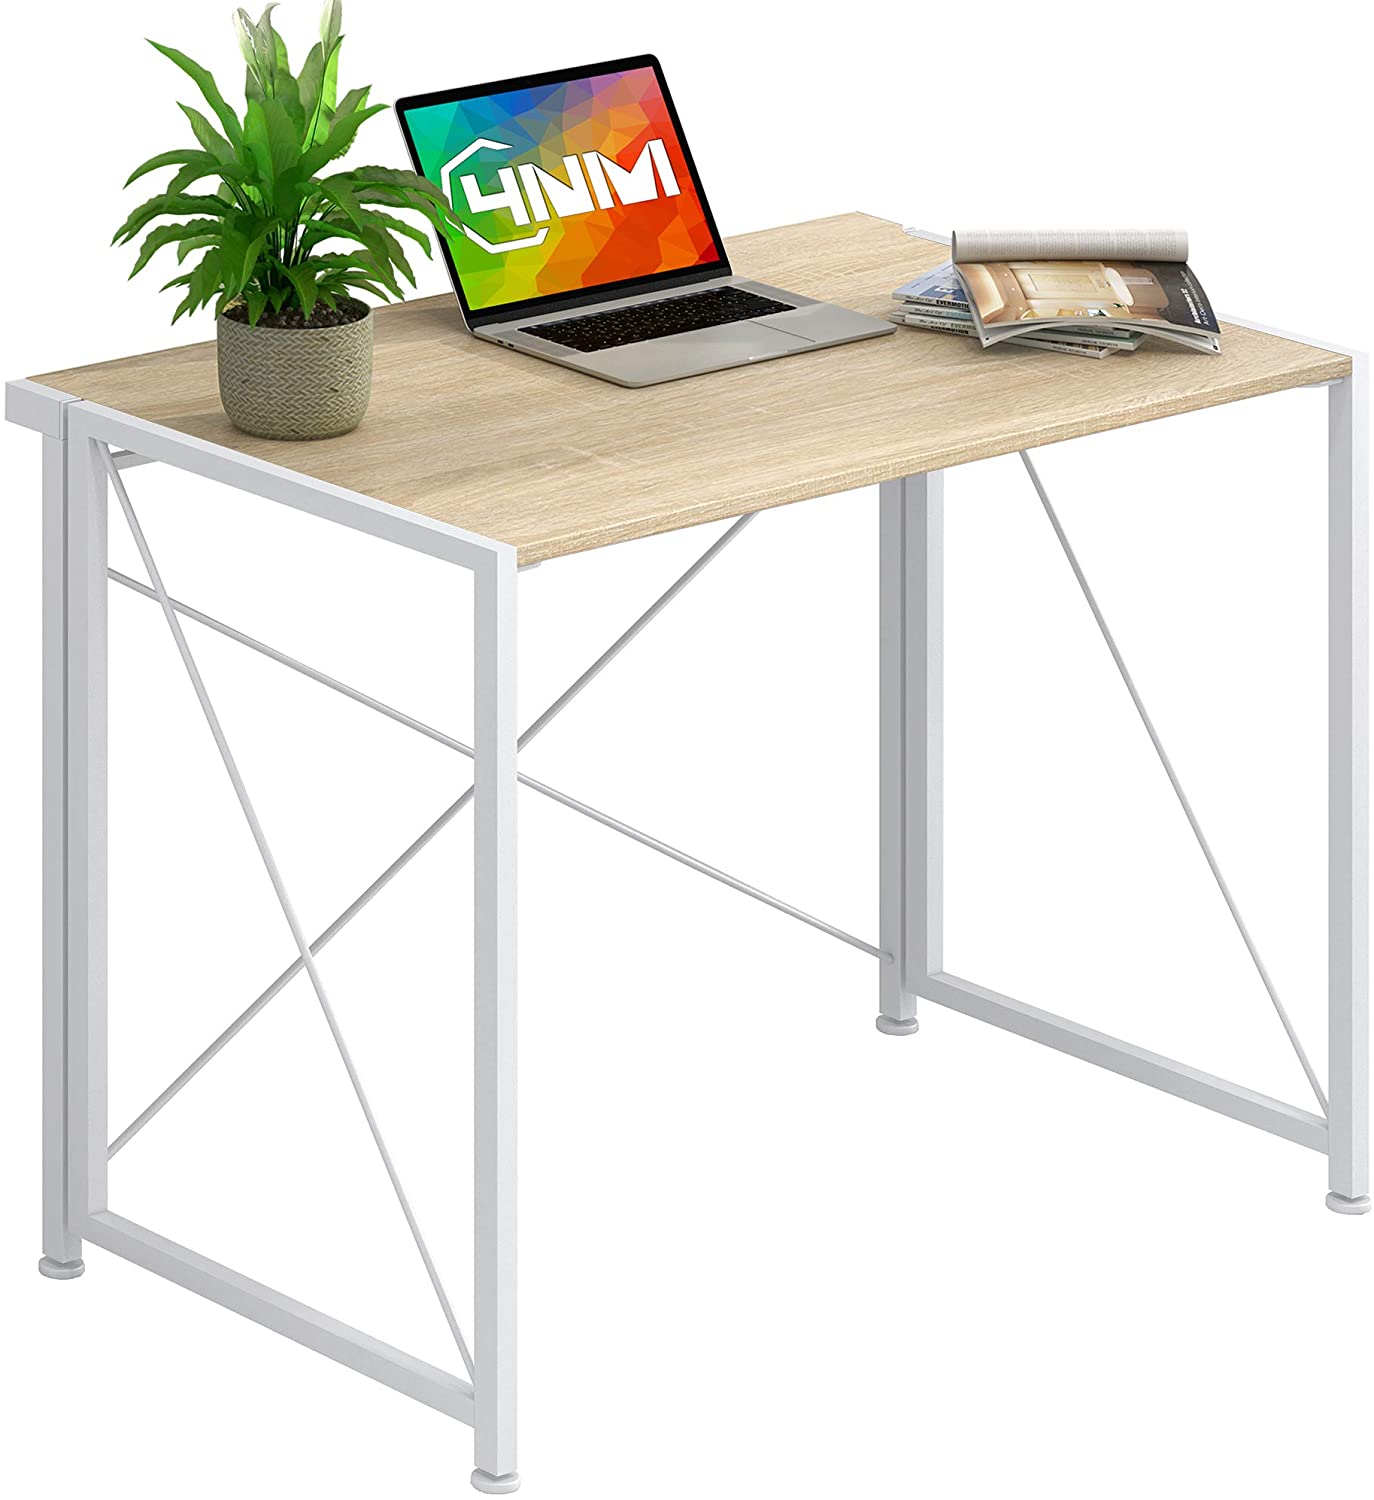 foldable office table with a laptop and a plant